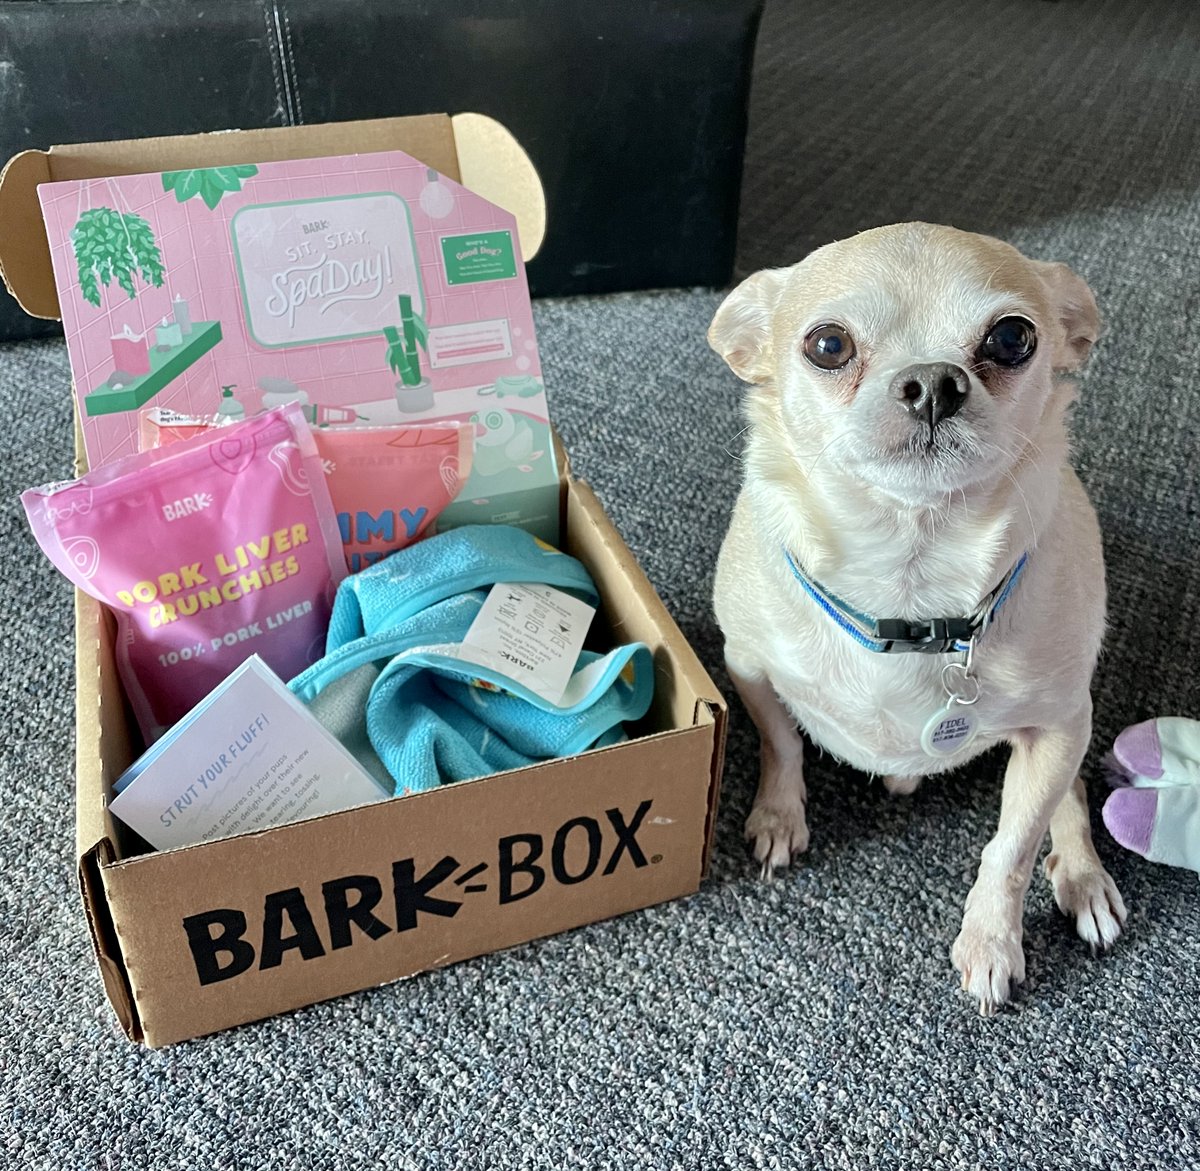 Fidel’s (and mine) first Bark Box came! We’re so excited! Fidel’s here modeling the robe and the goodies! Oh, the pork liver treats are the best! And we got some great new toys too! This is fun! We’re new to this! #BarkBoxDay